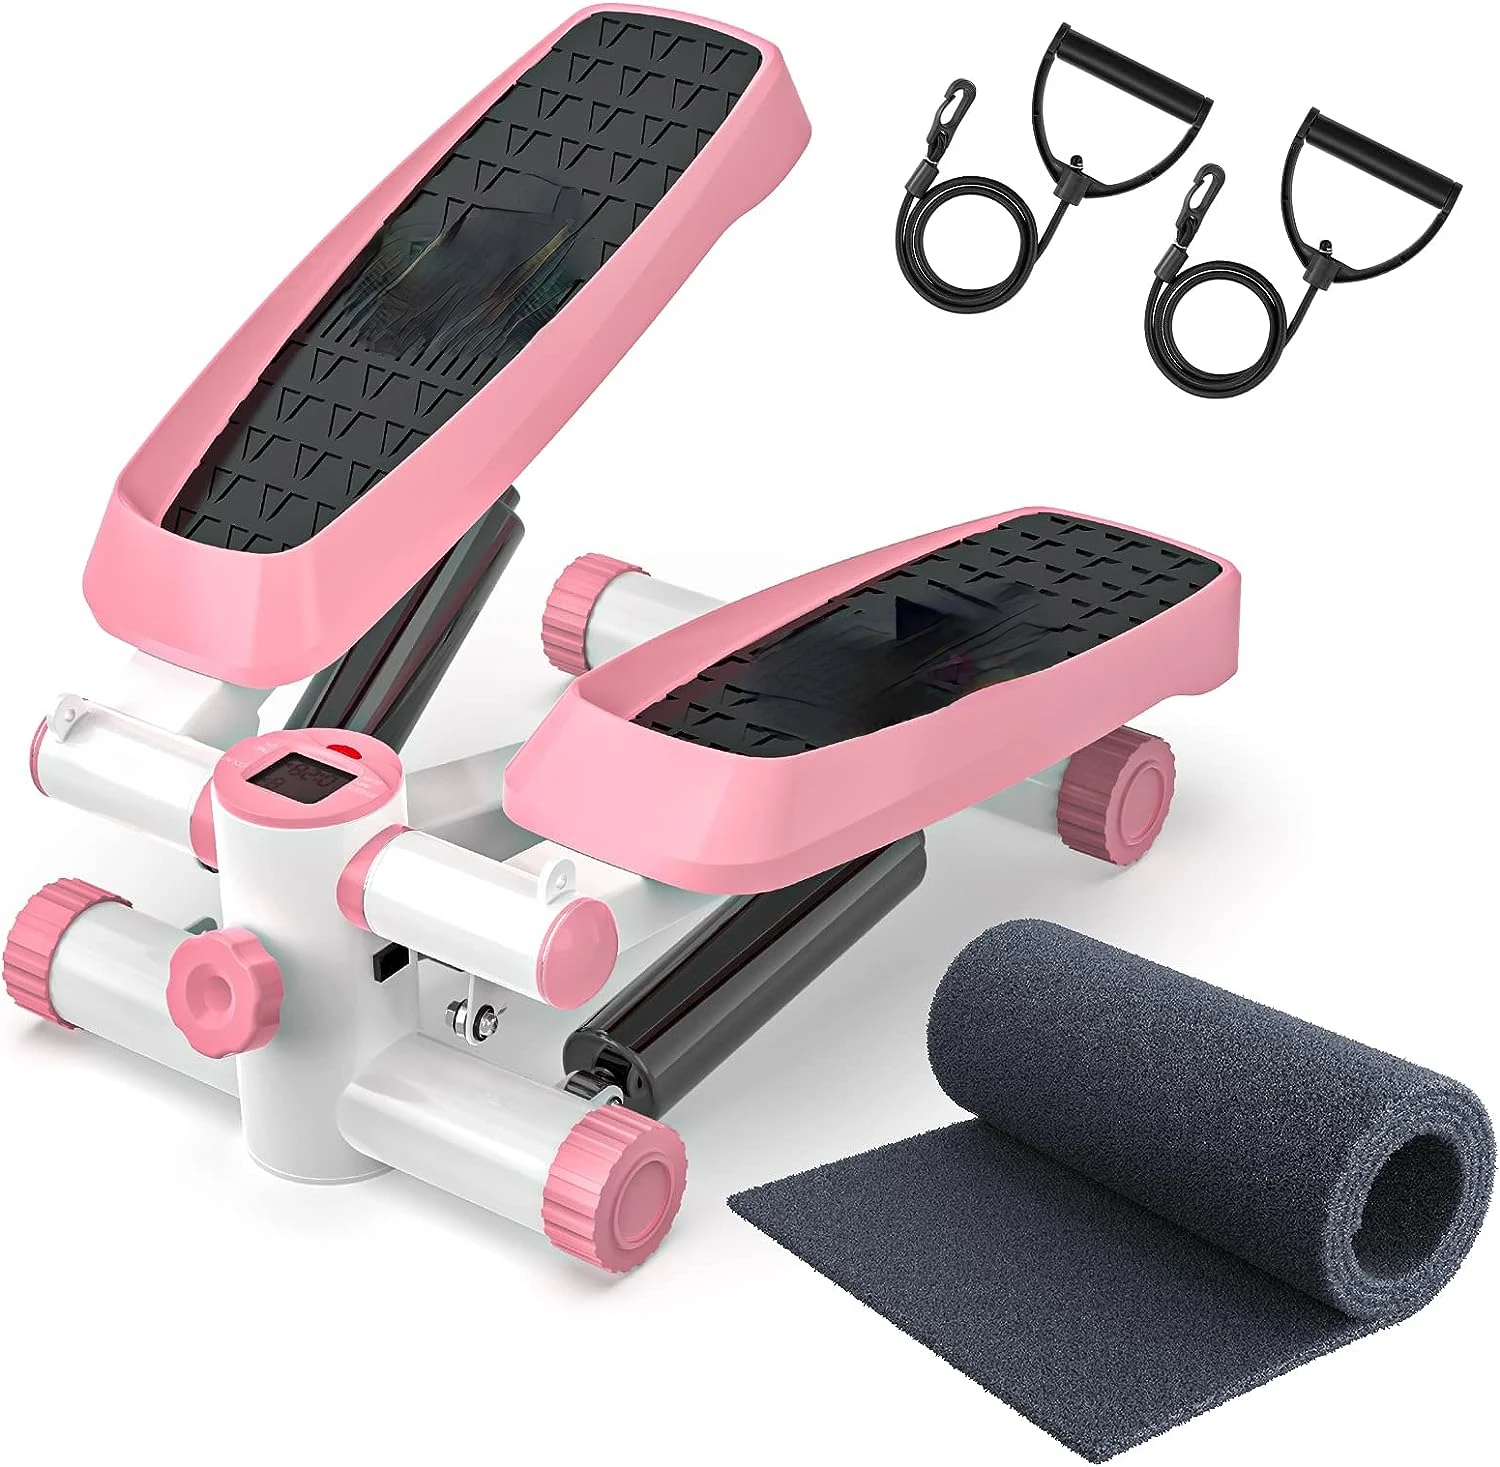 

for Exercise, Mini Stepper Machine with Resistance Bands & Calories Count, Stair Steppers for Exercise 330 lbs Weight Capaci